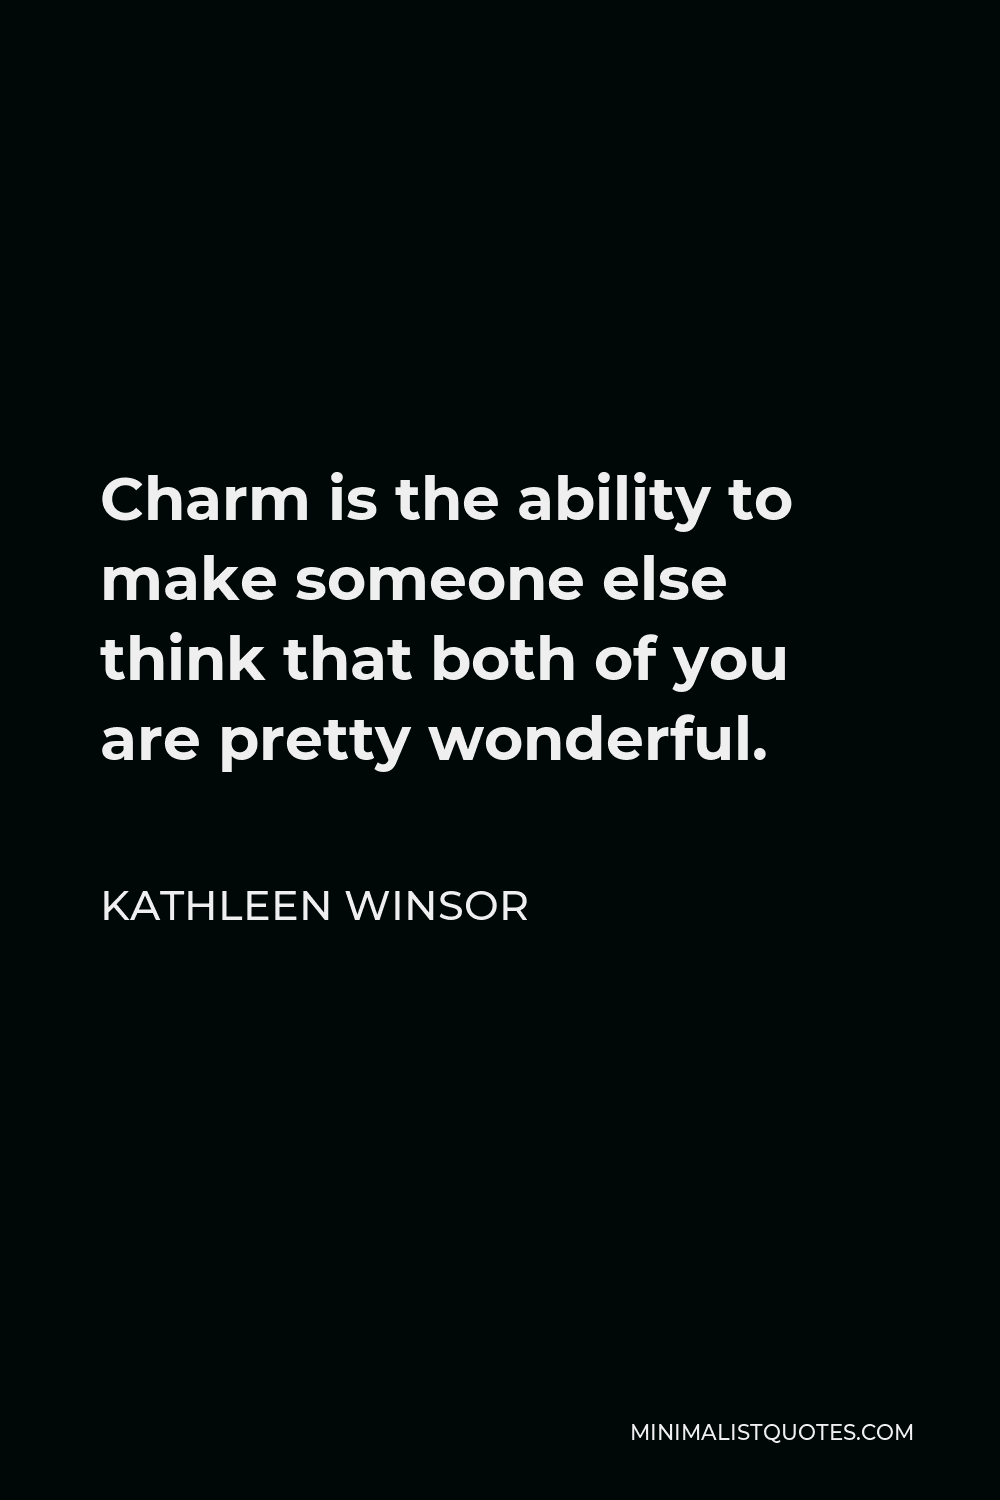 Kathleen Winsor Quote - Charm is the ability to make someone else think that both of you are pretty wonderful.